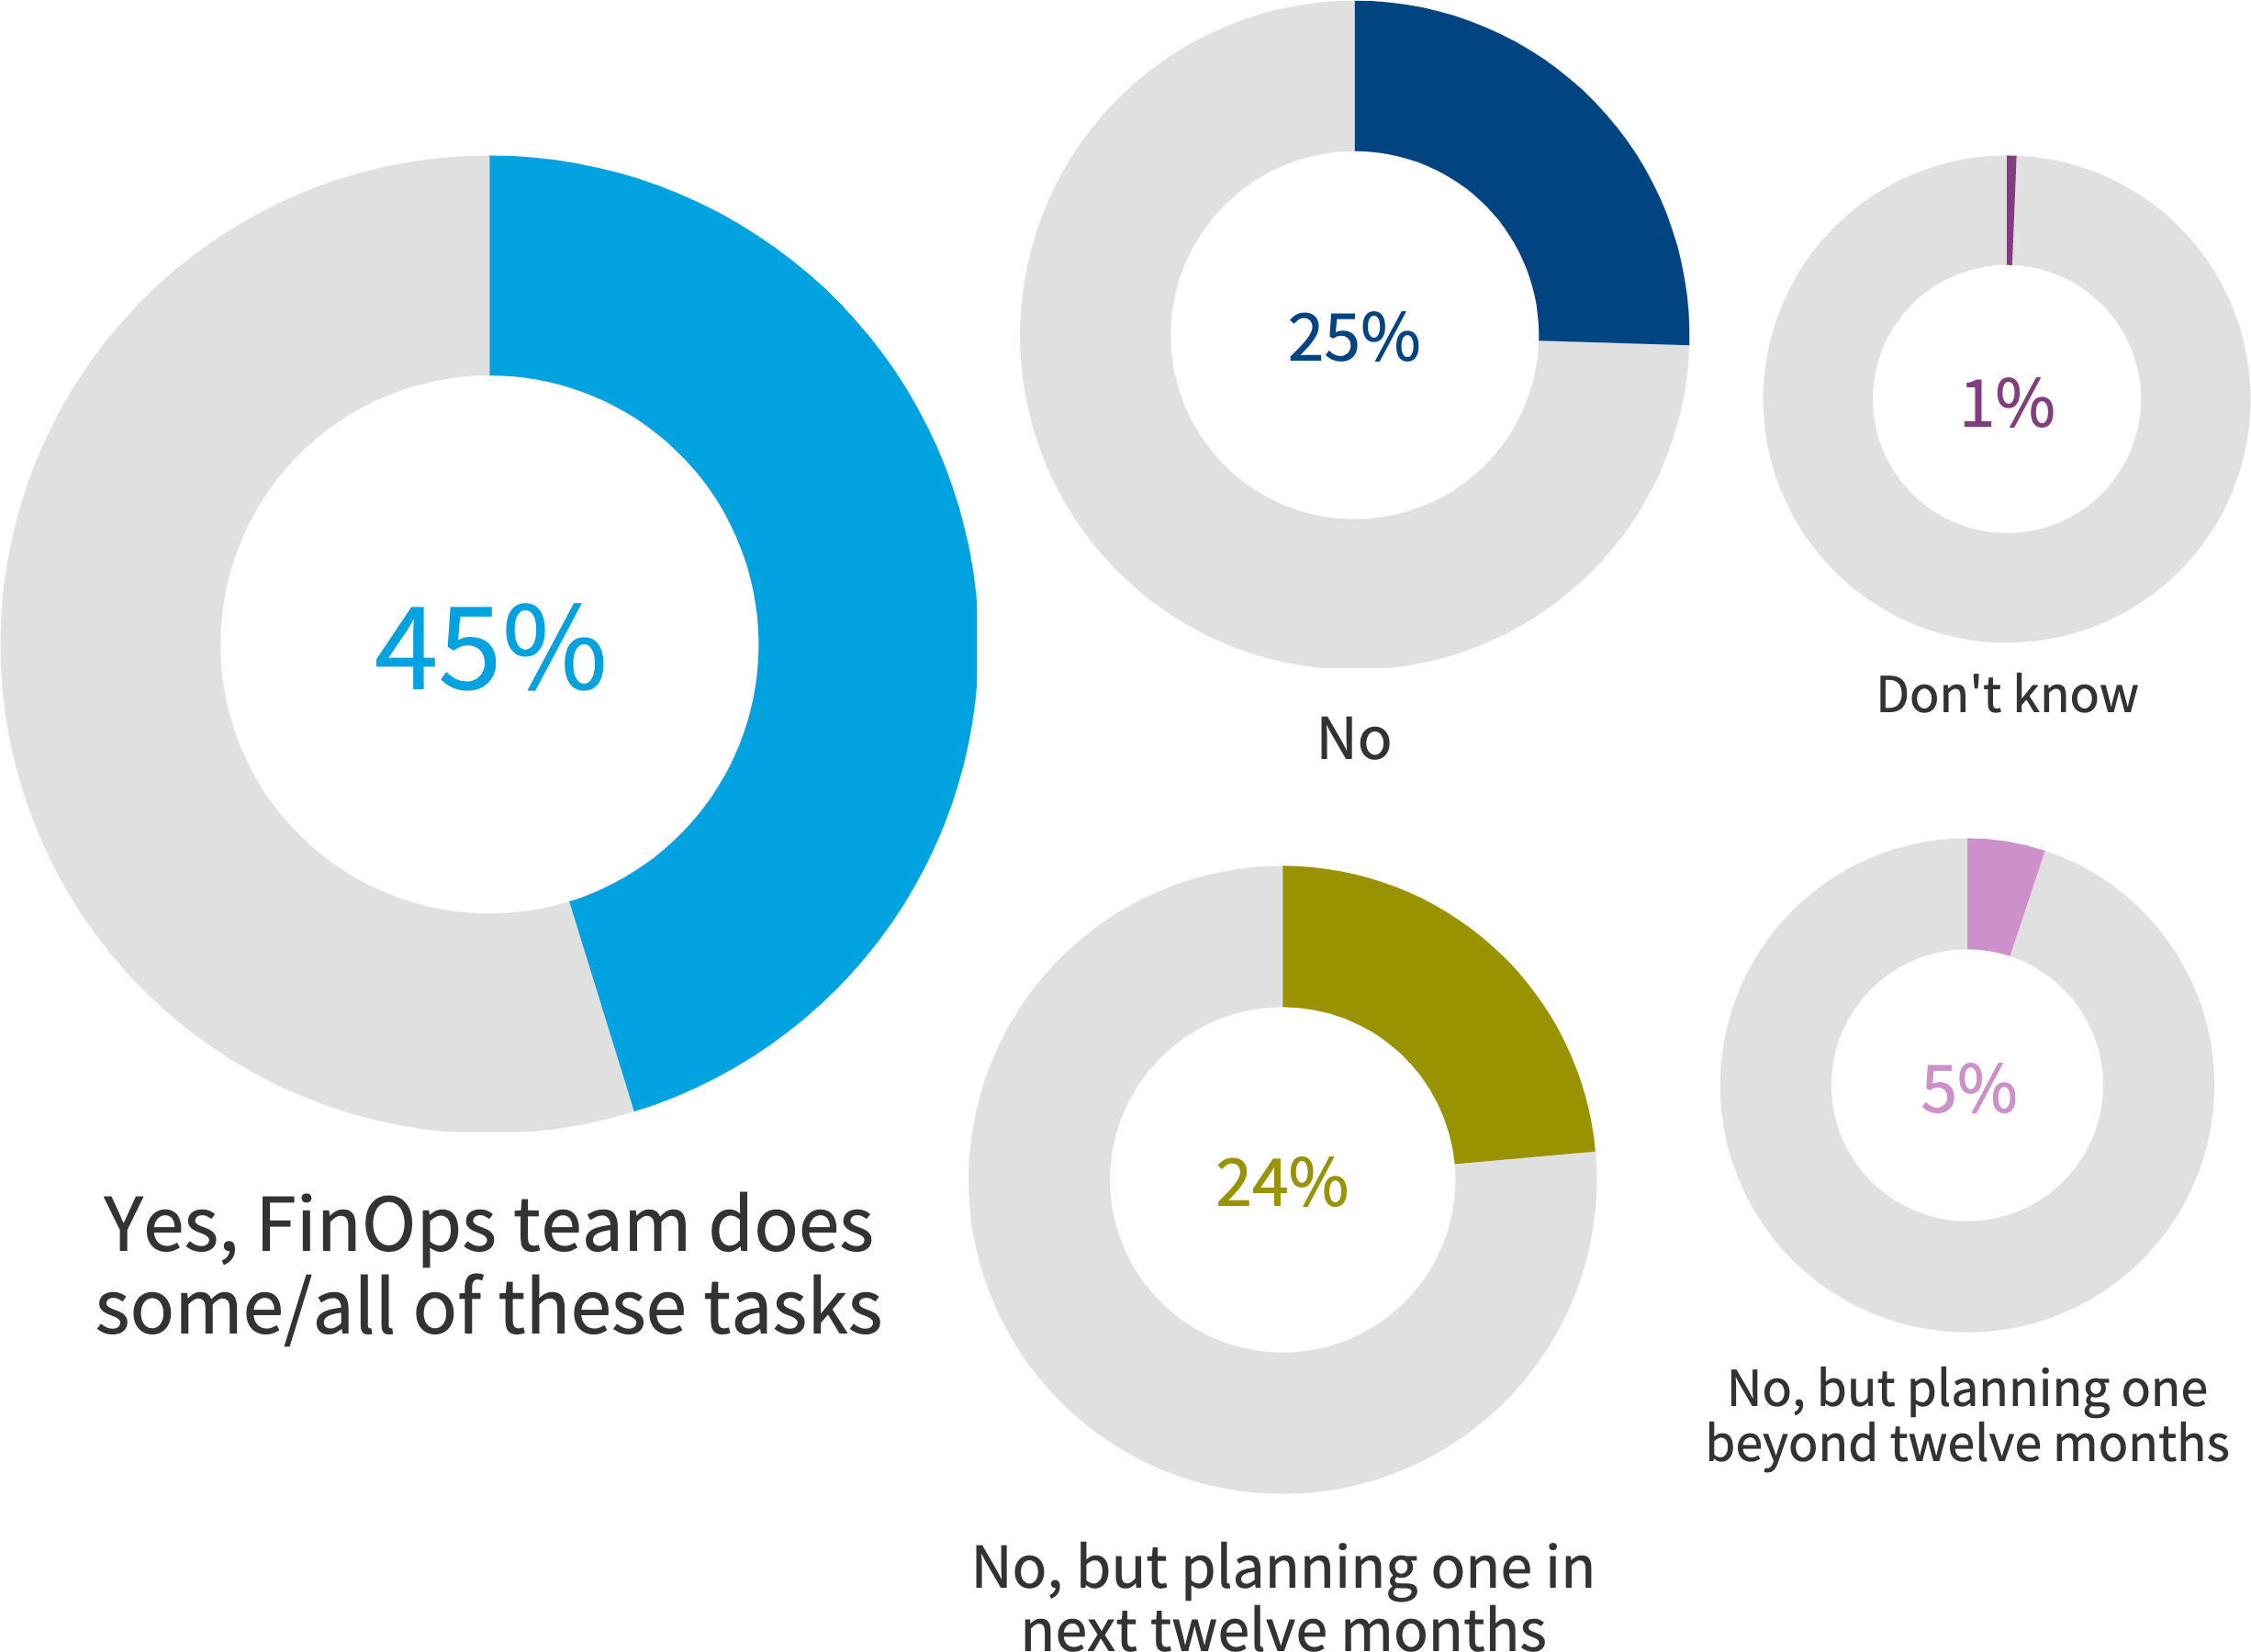 Chart: Does your company have a FinOps team to advise, manage or execute cloud cost optimization strategies?